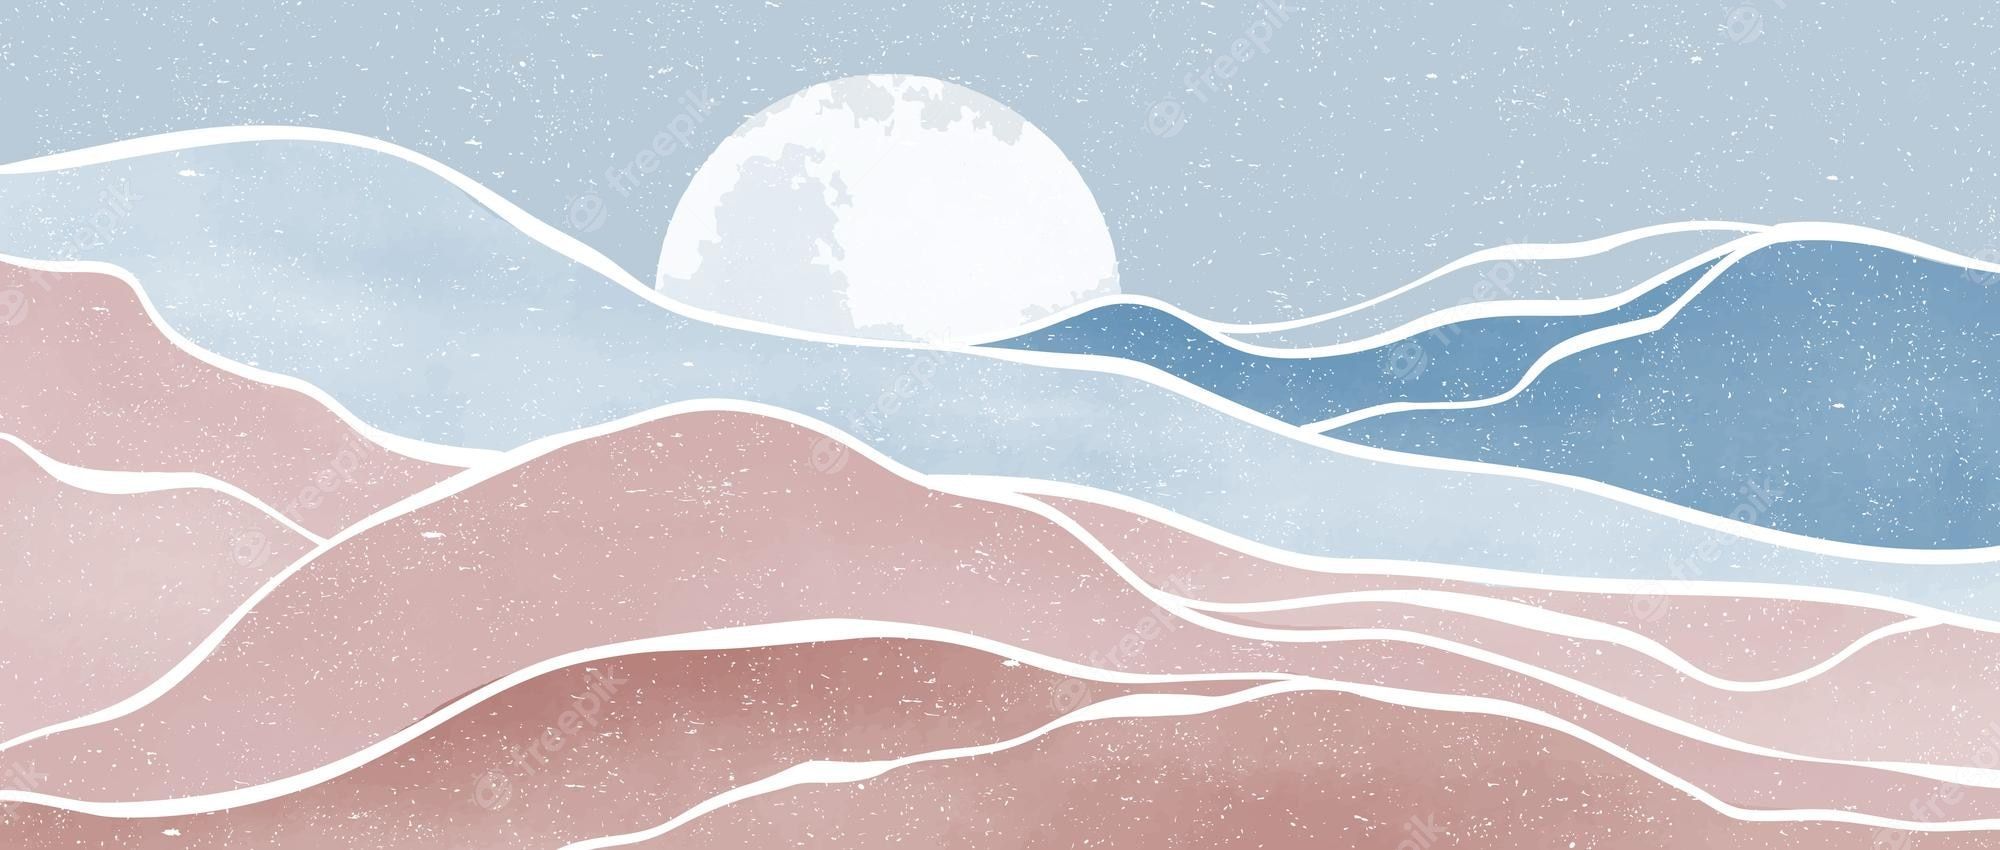 Premium Vector. Ocean wave and the moon creative minimalist modern hand painted illustration abstract contemporary aesthetic background landscapes